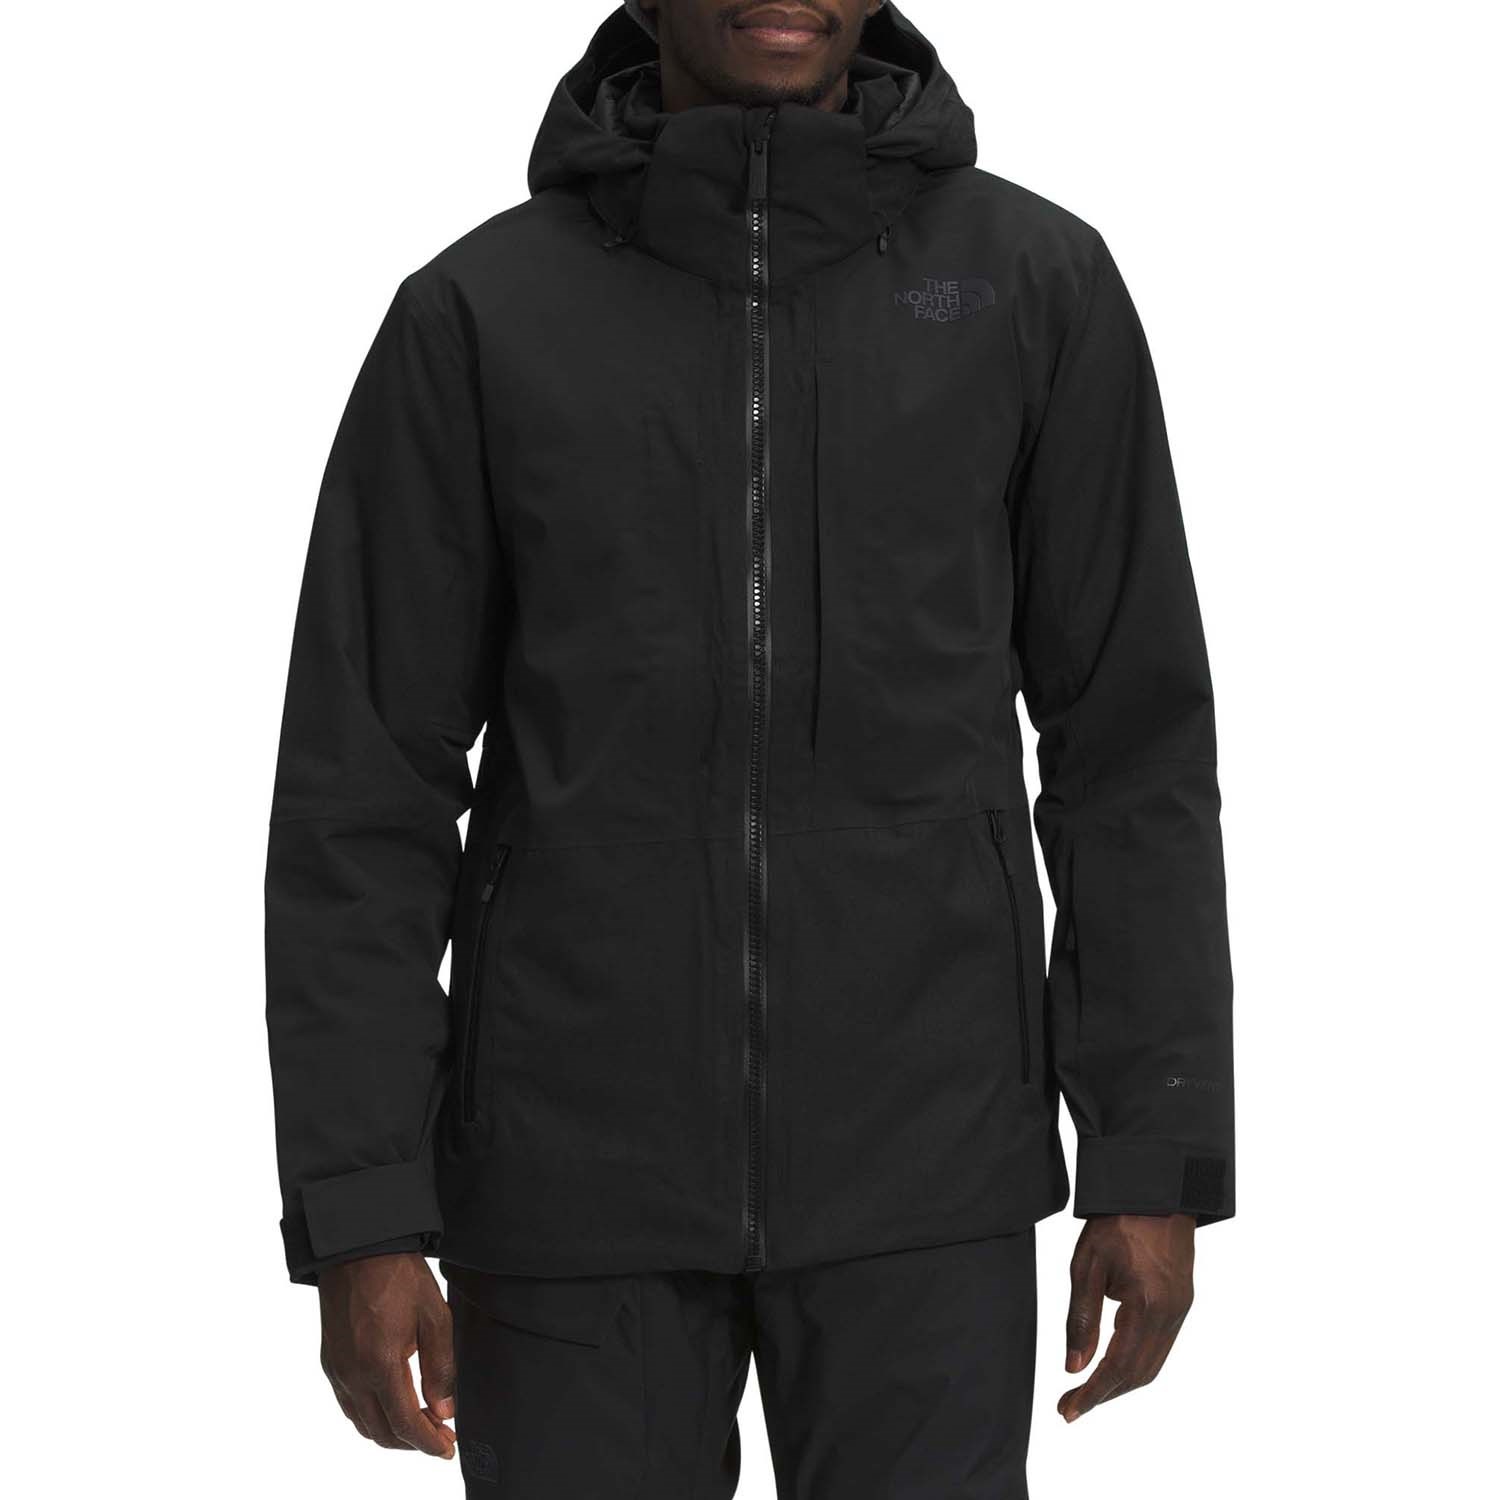 stamp Sweat cubic The North Face Chakal Jacket | evo